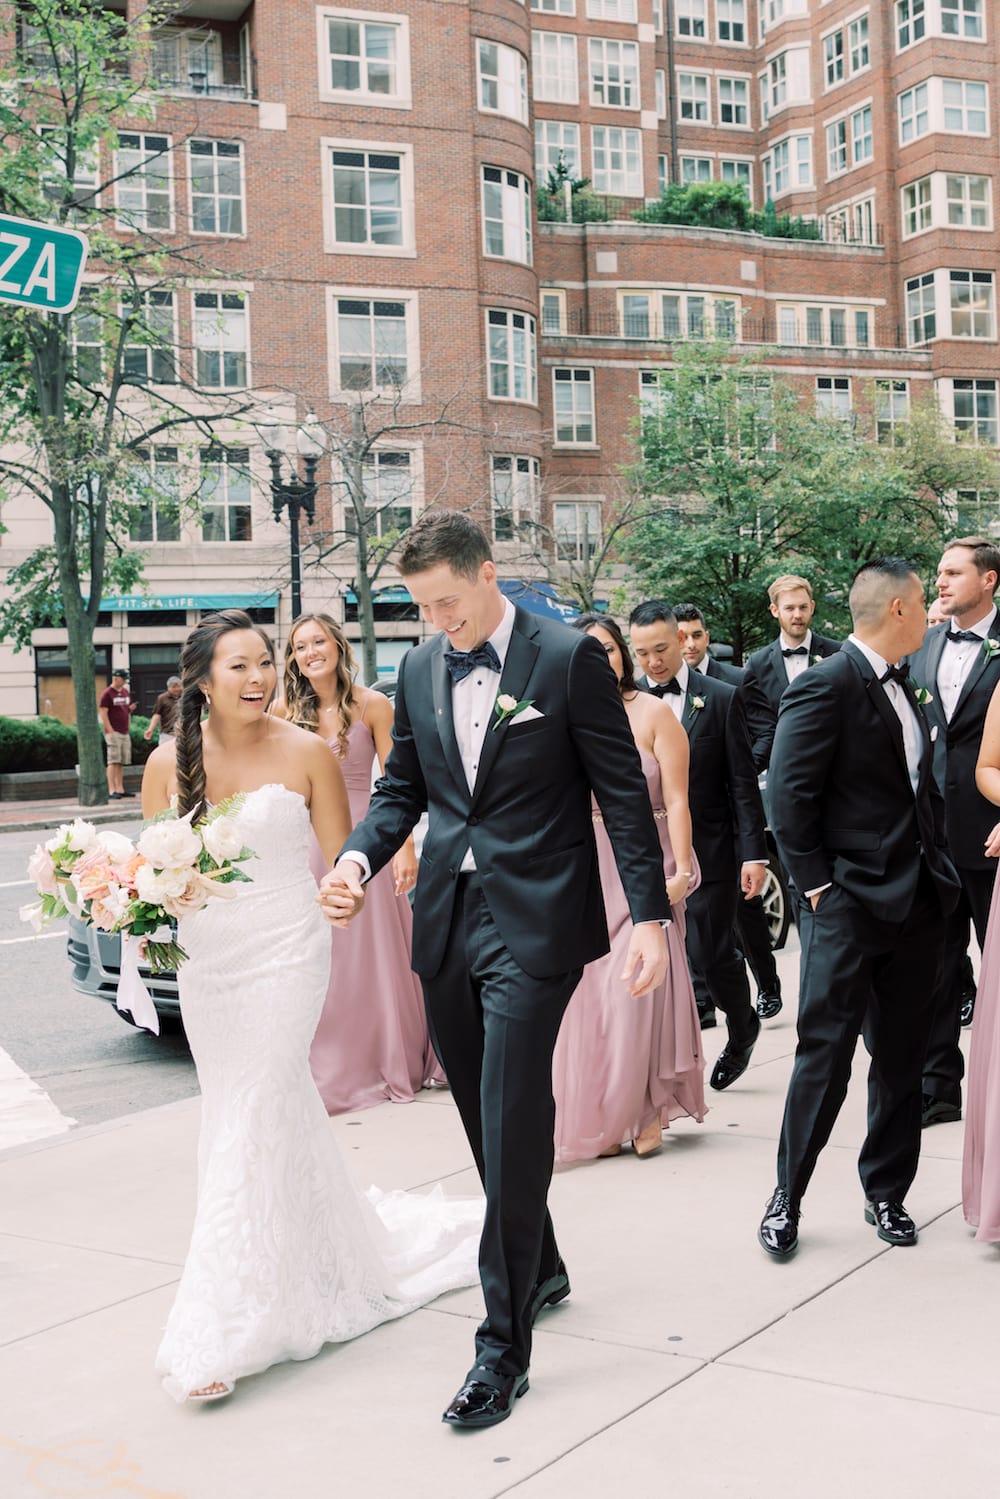 Bride and groom sharing alughs as they walk along Boston with their entourage, taken by Marcela Diaz Photography